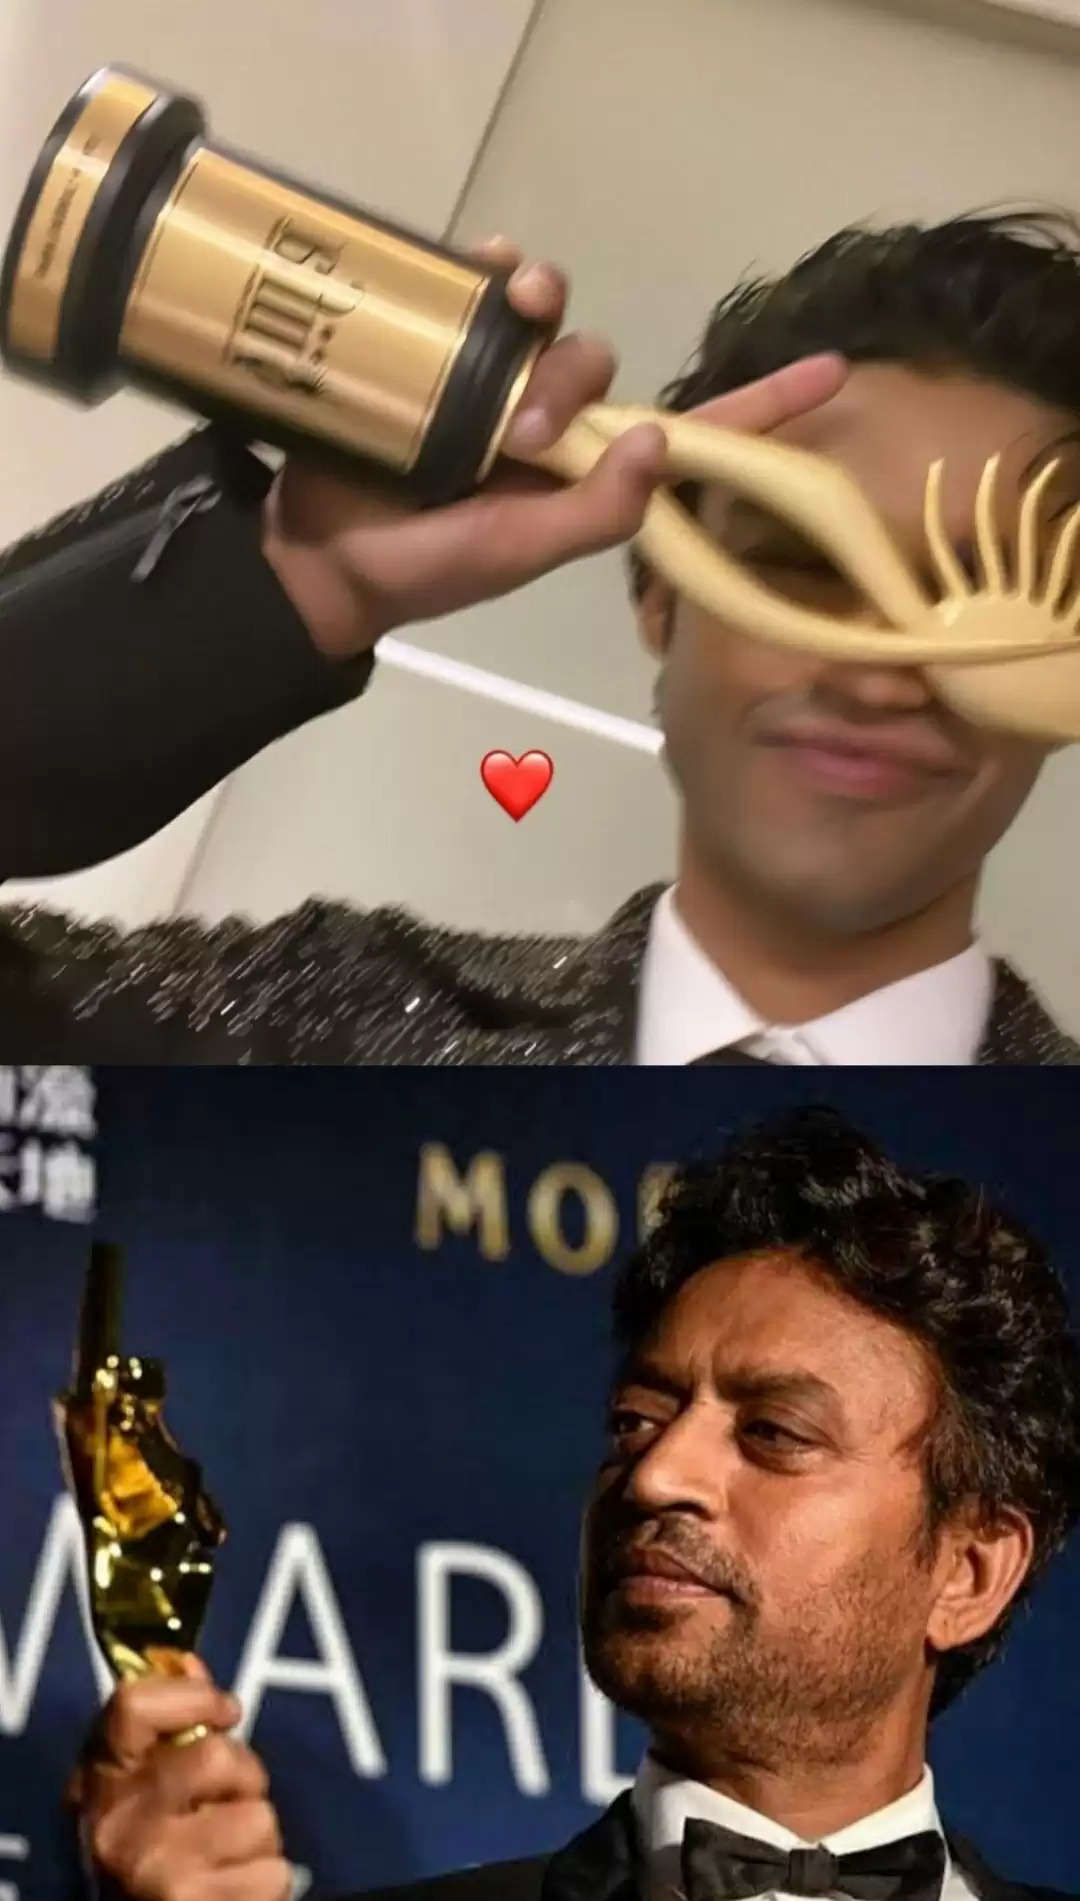 Babil and Irrfan 